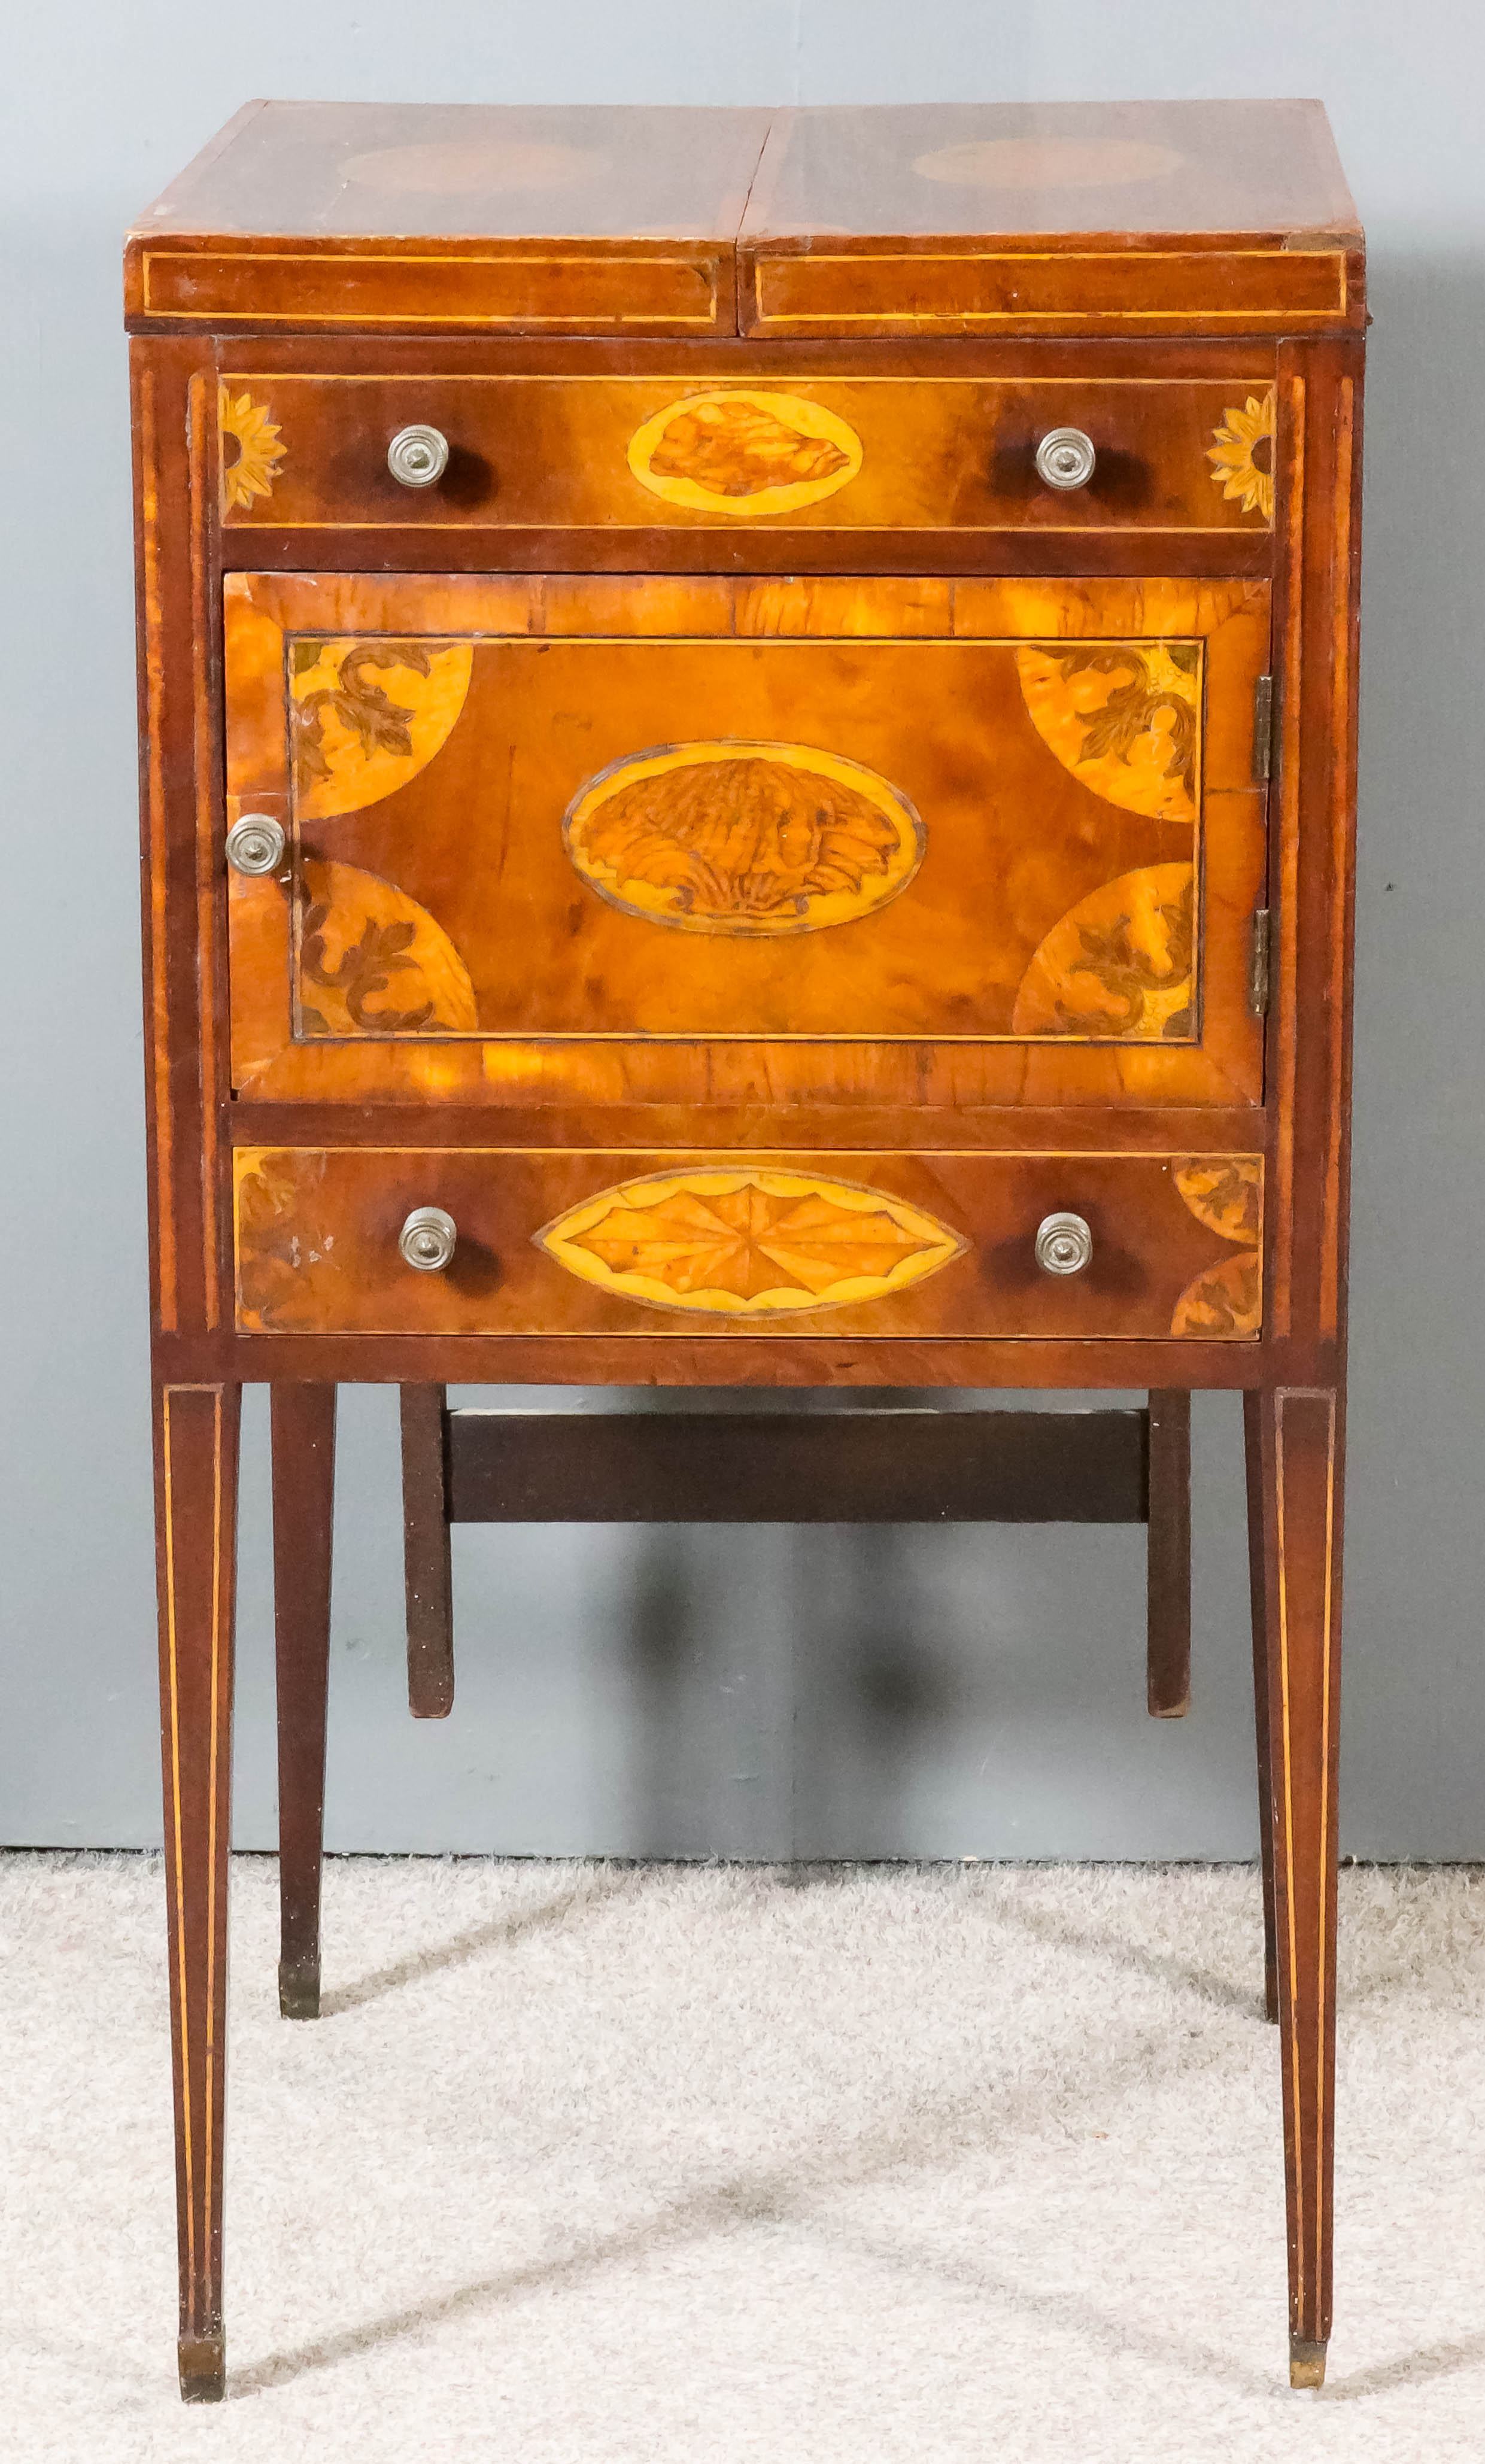 A George III Gentleman's Mahogany Enclosed Wash Stand, the top and front inlaid with oval shell